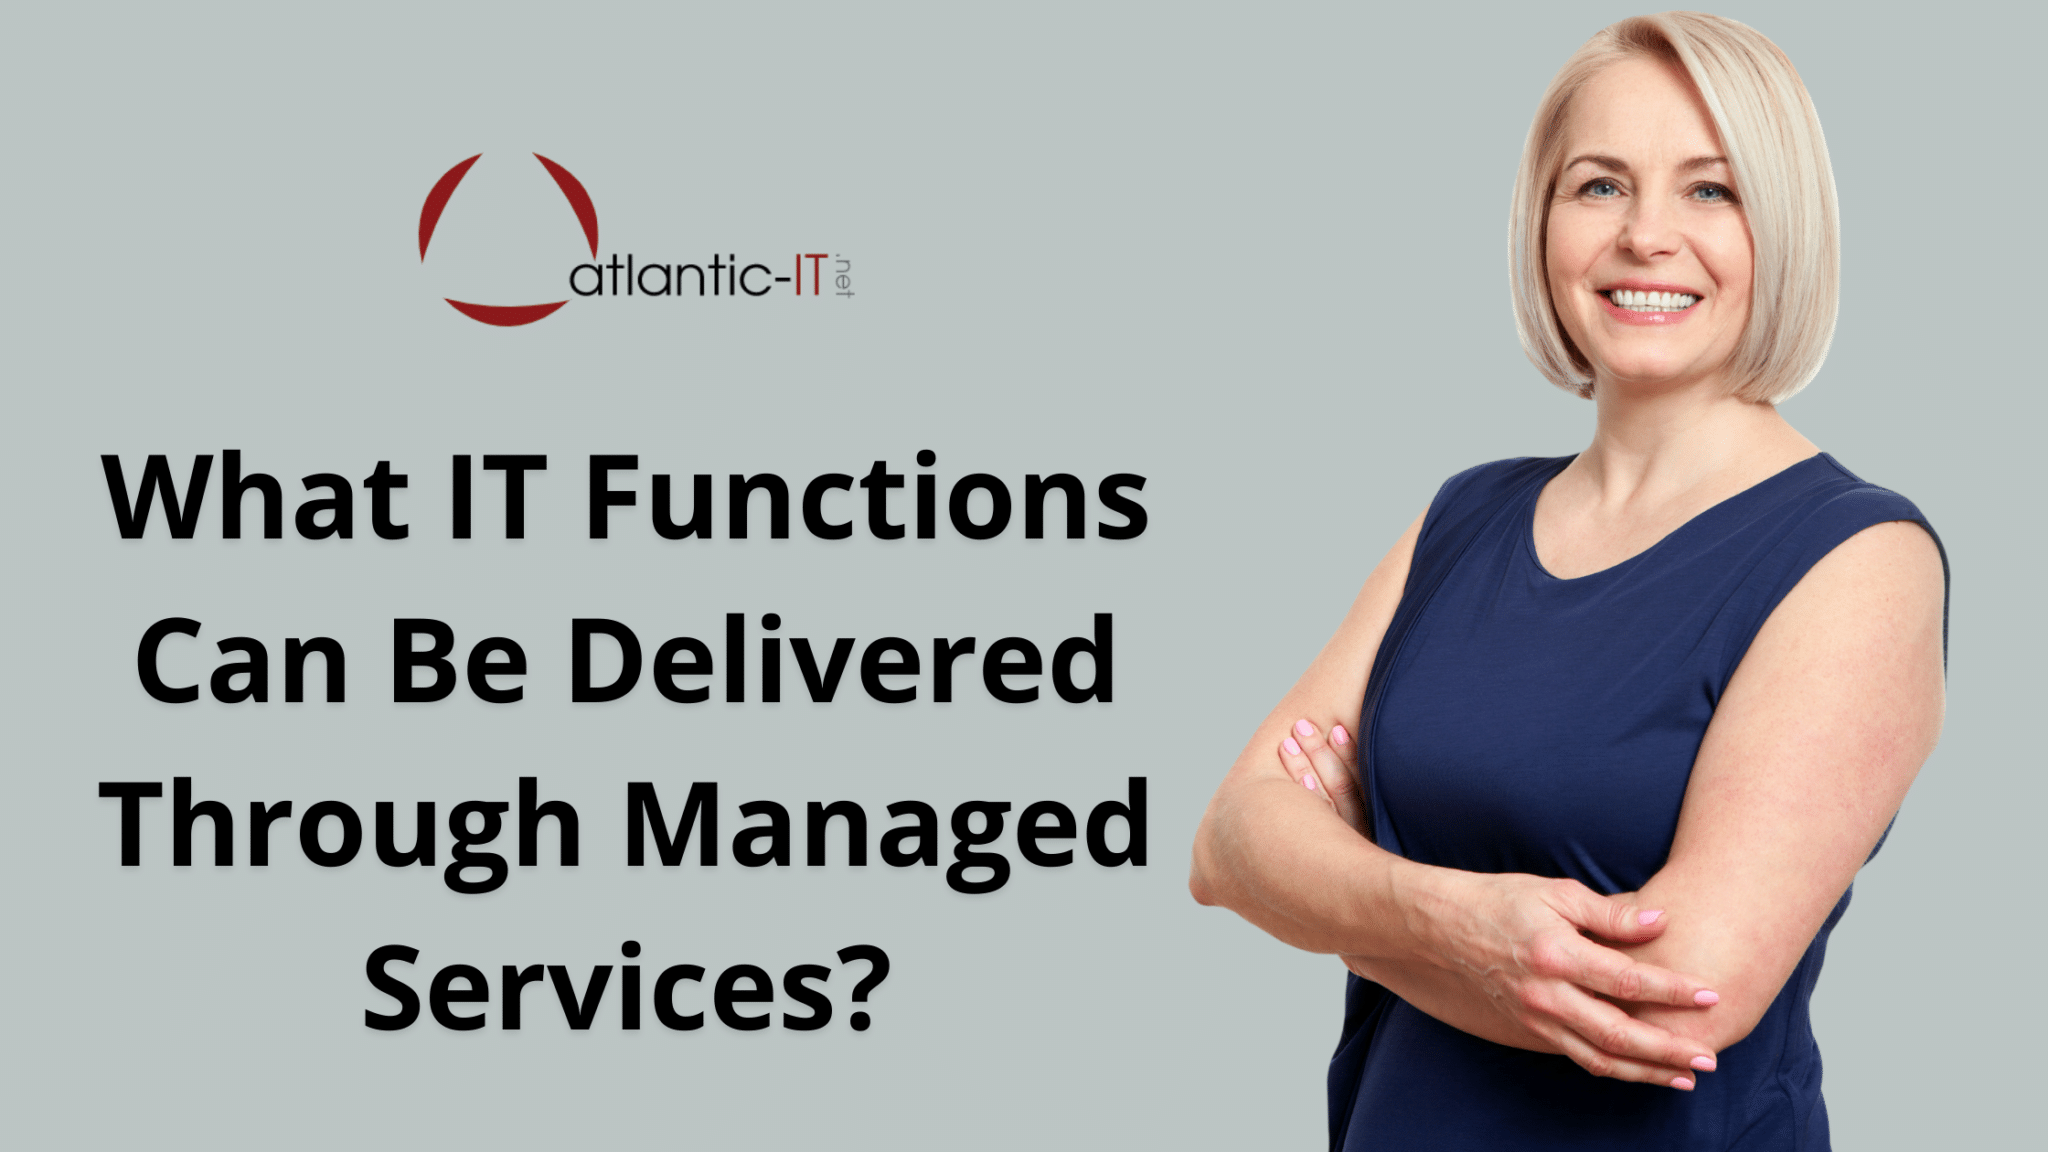 What IT Functions Can Be Delivered Through Managed Services?